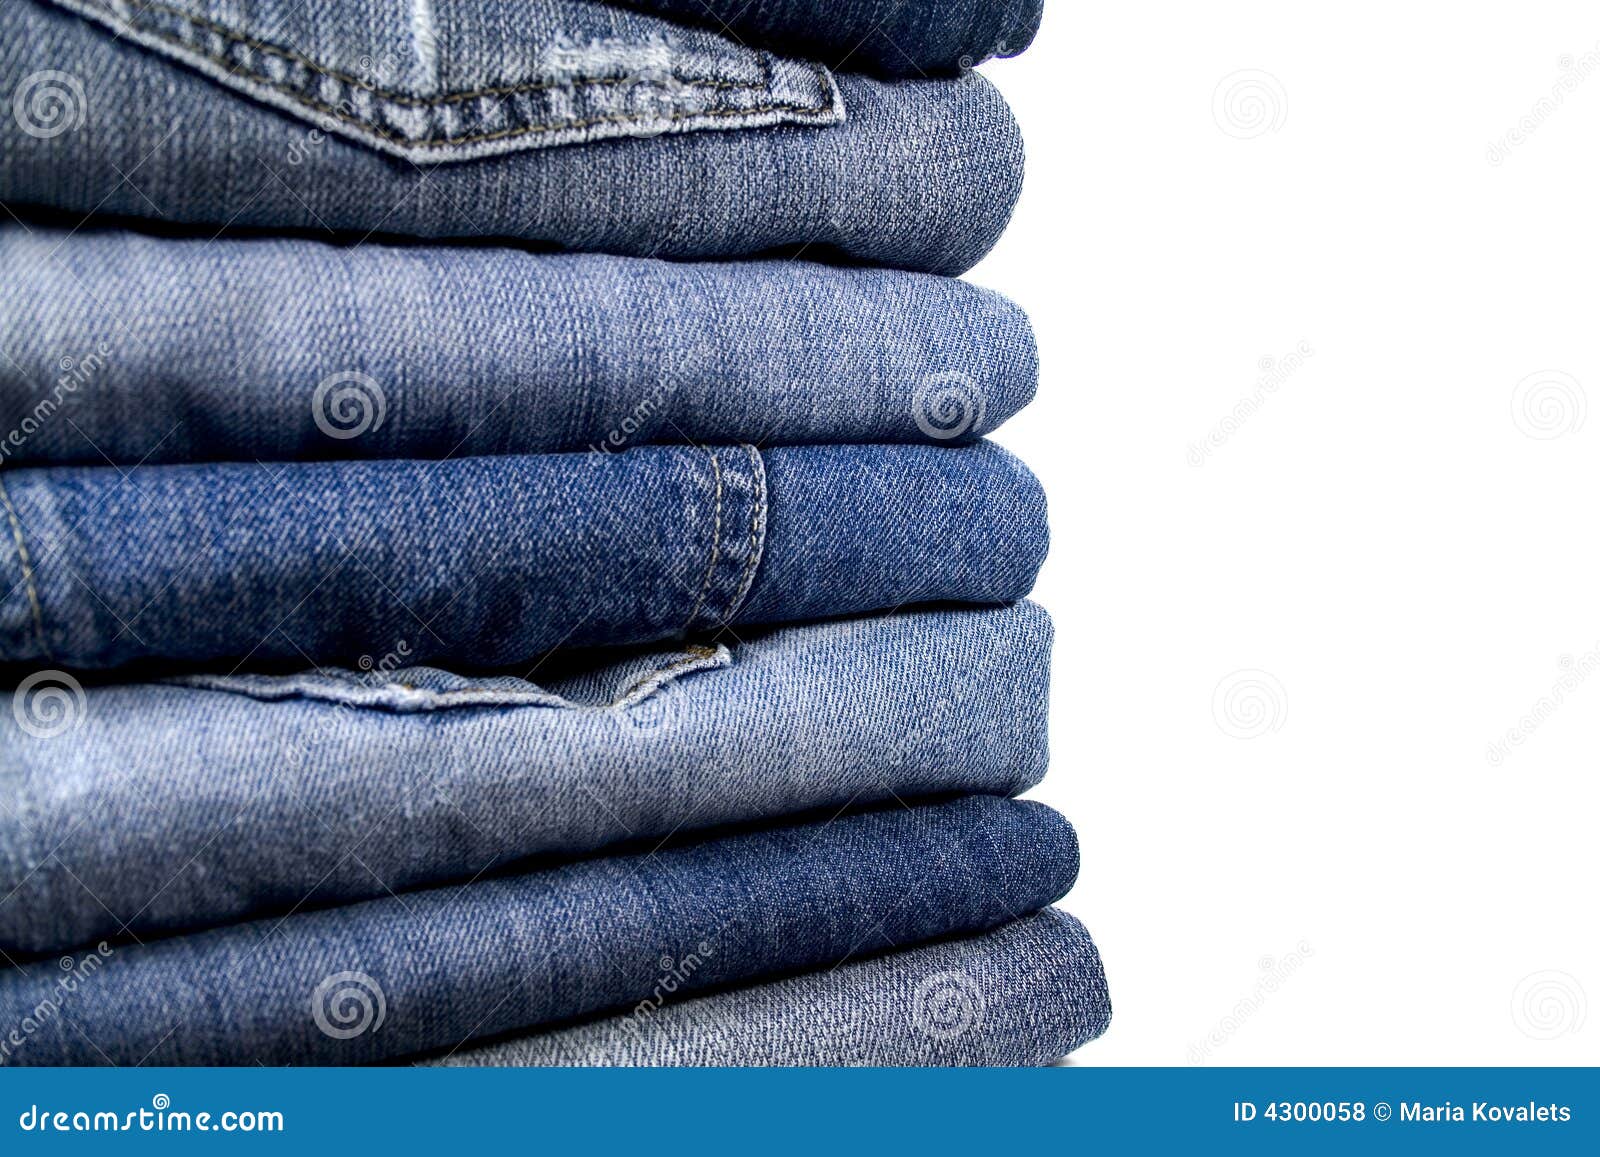 Stack of blue jeans stock photo. Image of personal, tissue - 4300058